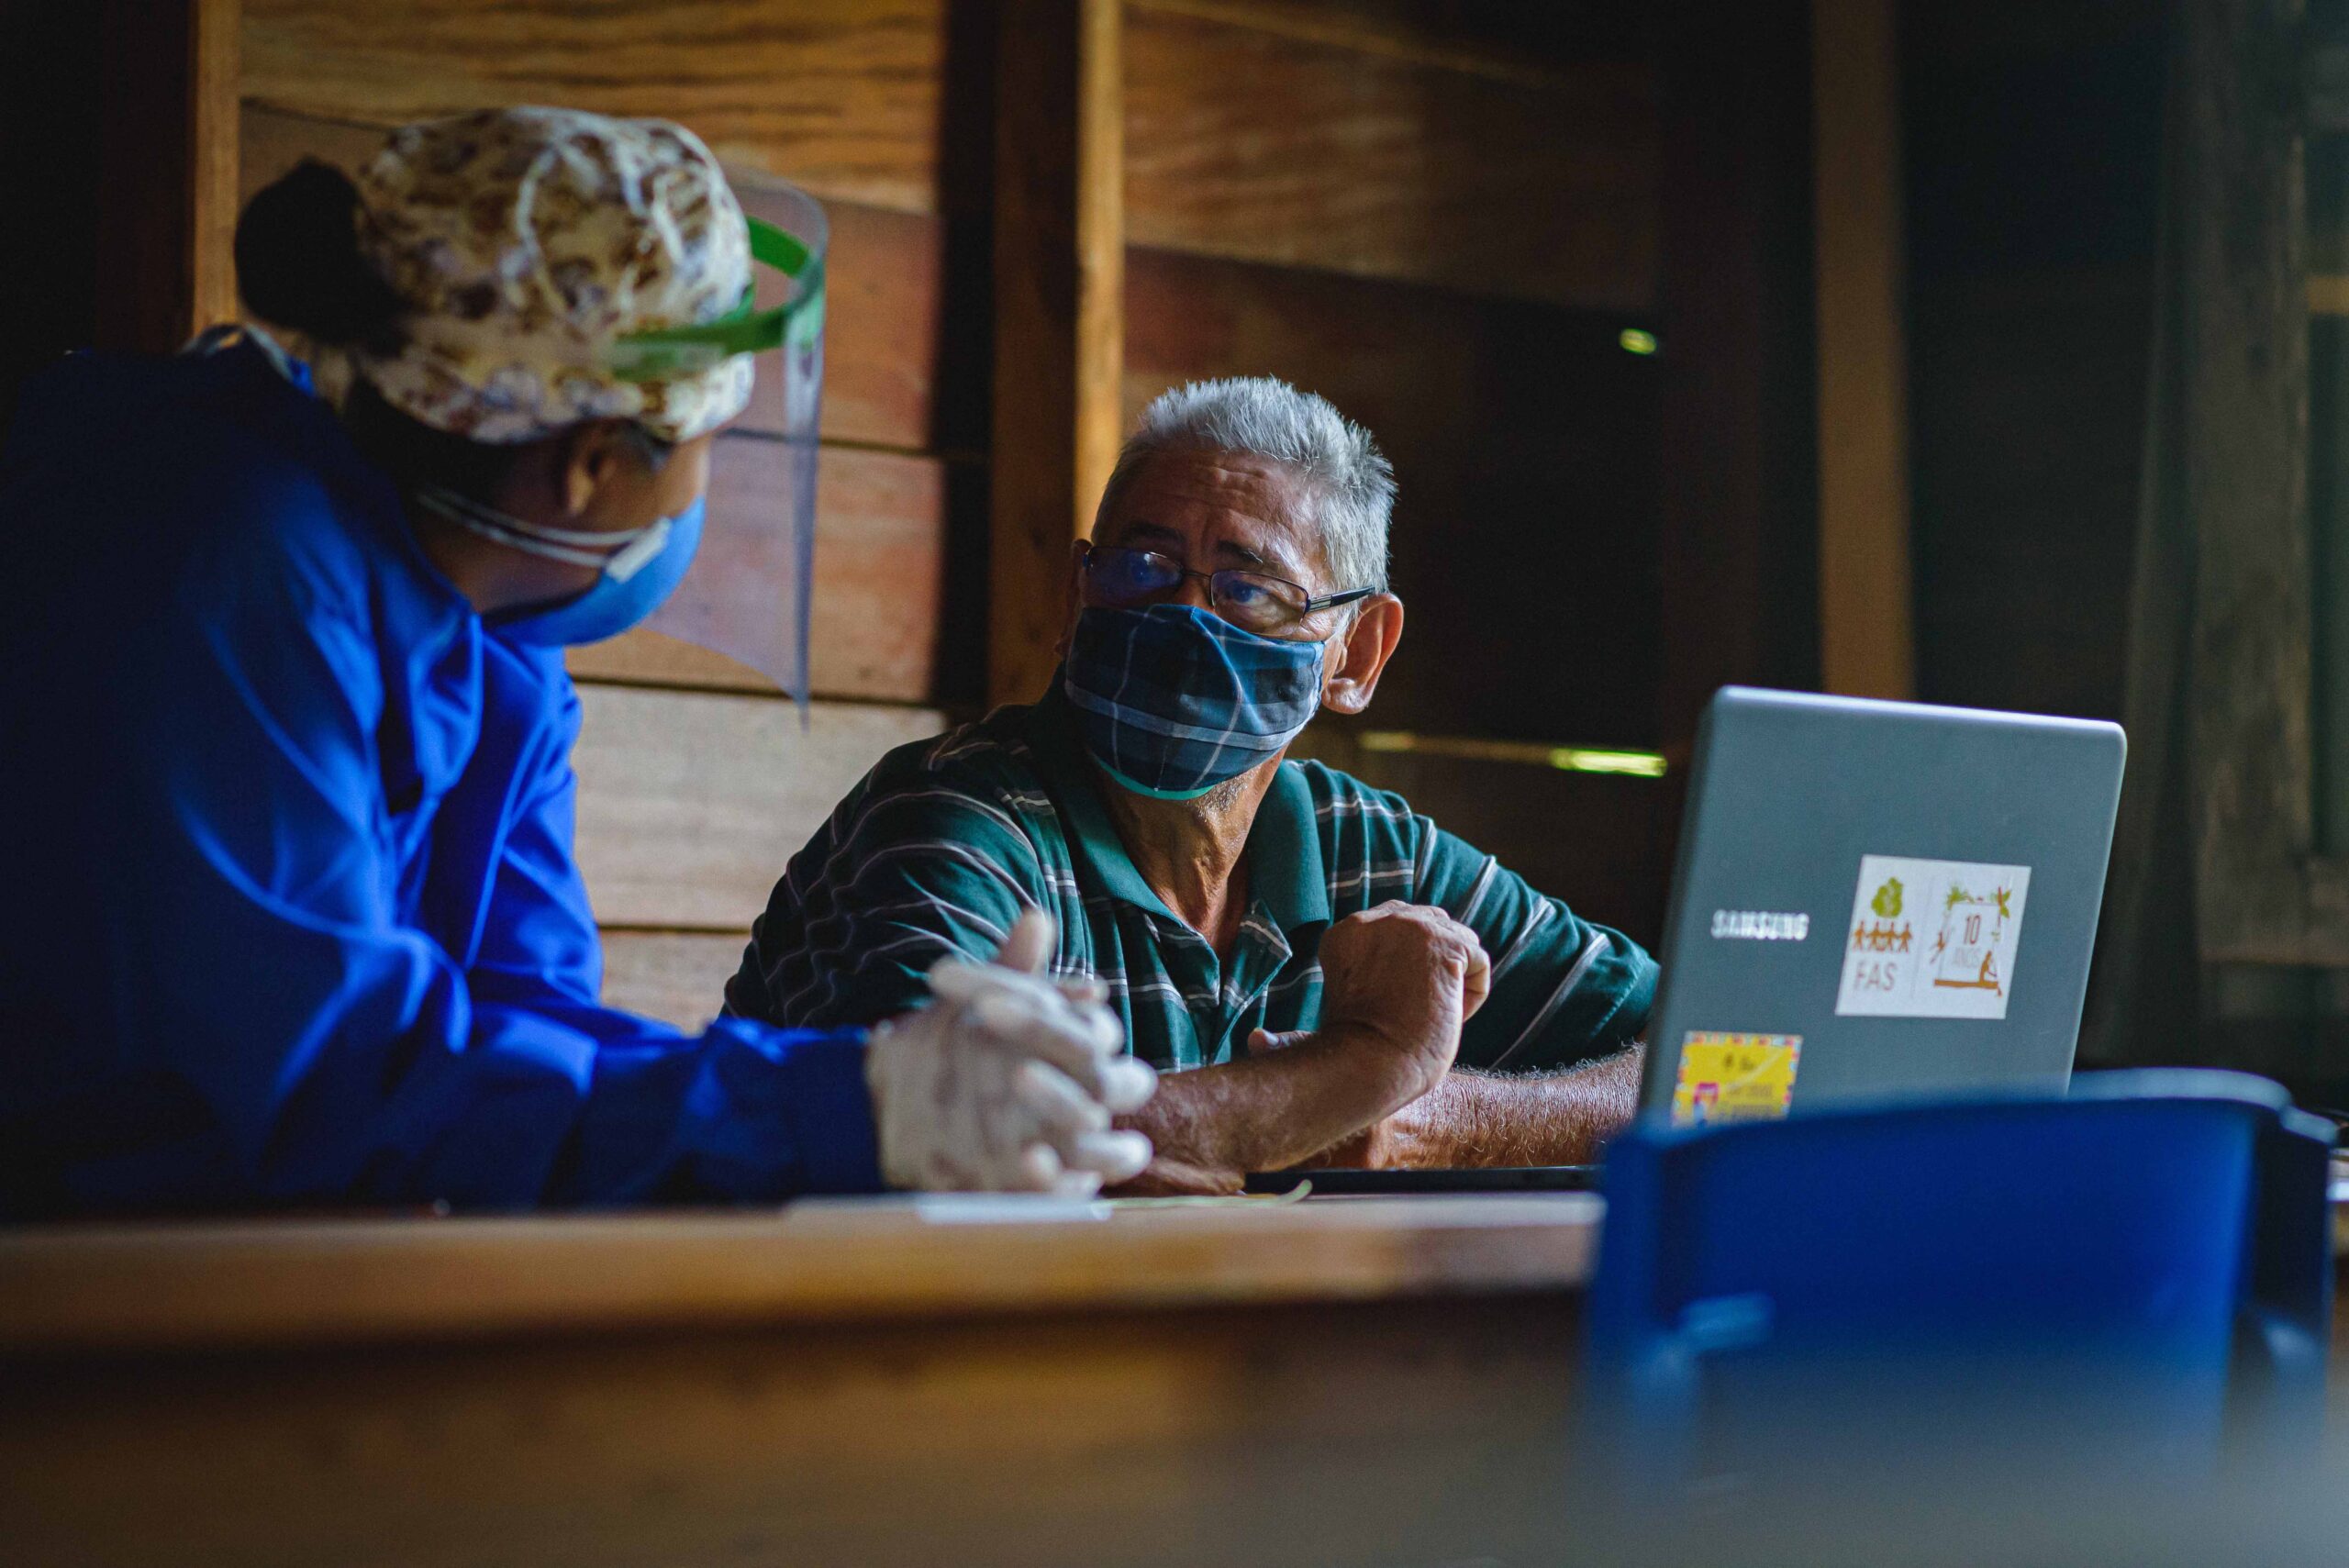 JBS finances the operation of telehealth clinics in remote communities in Amazonas